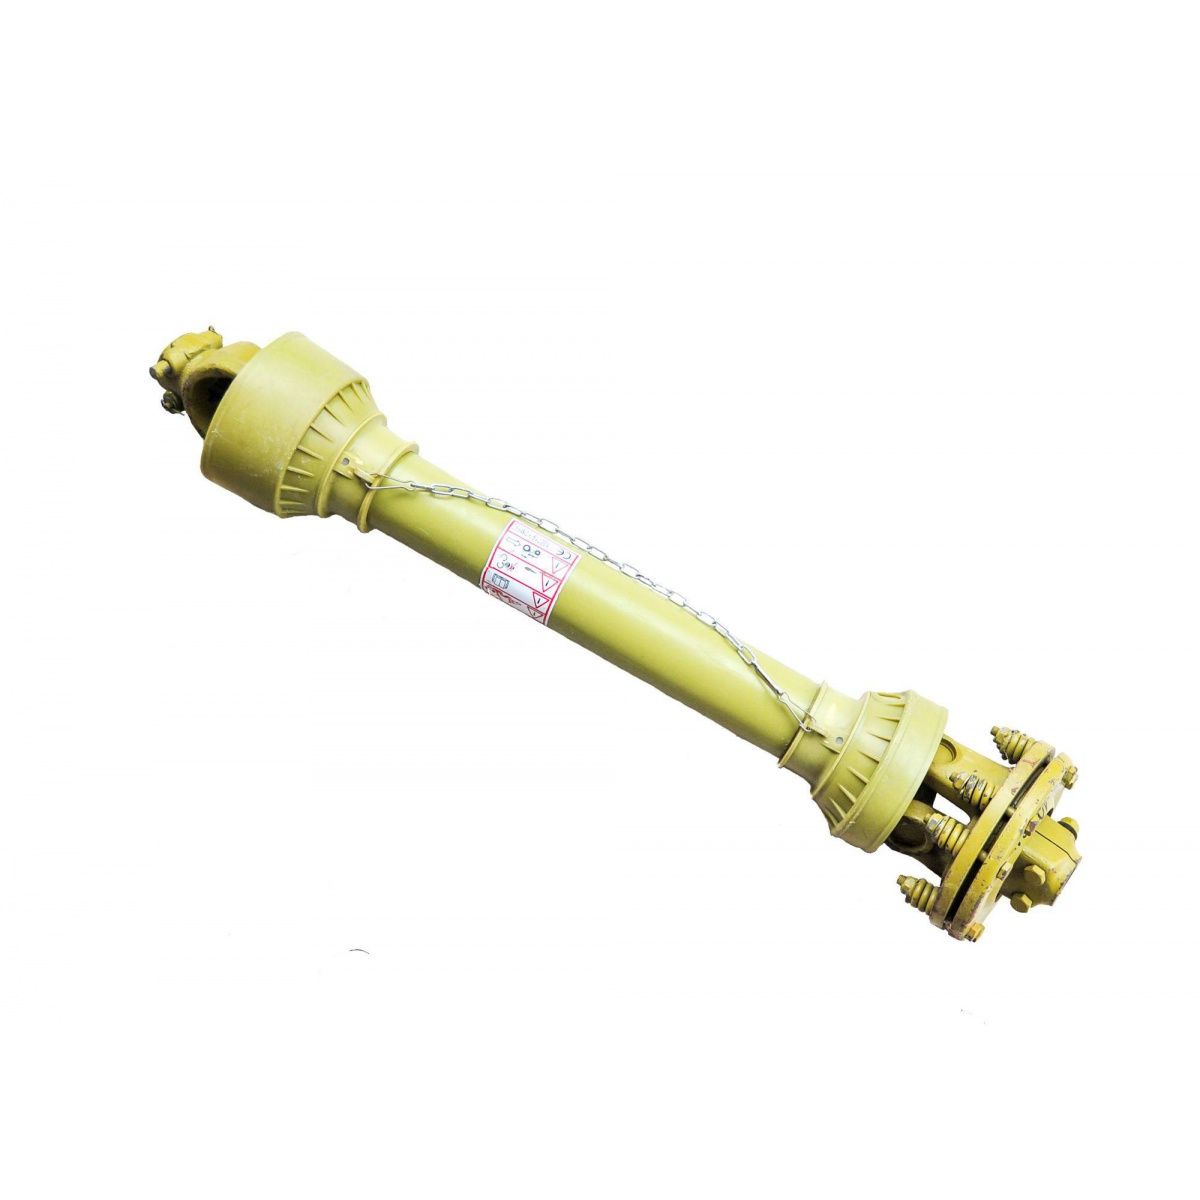 PTO shaft with clutch 07B - 130 cm / up to 105 HP